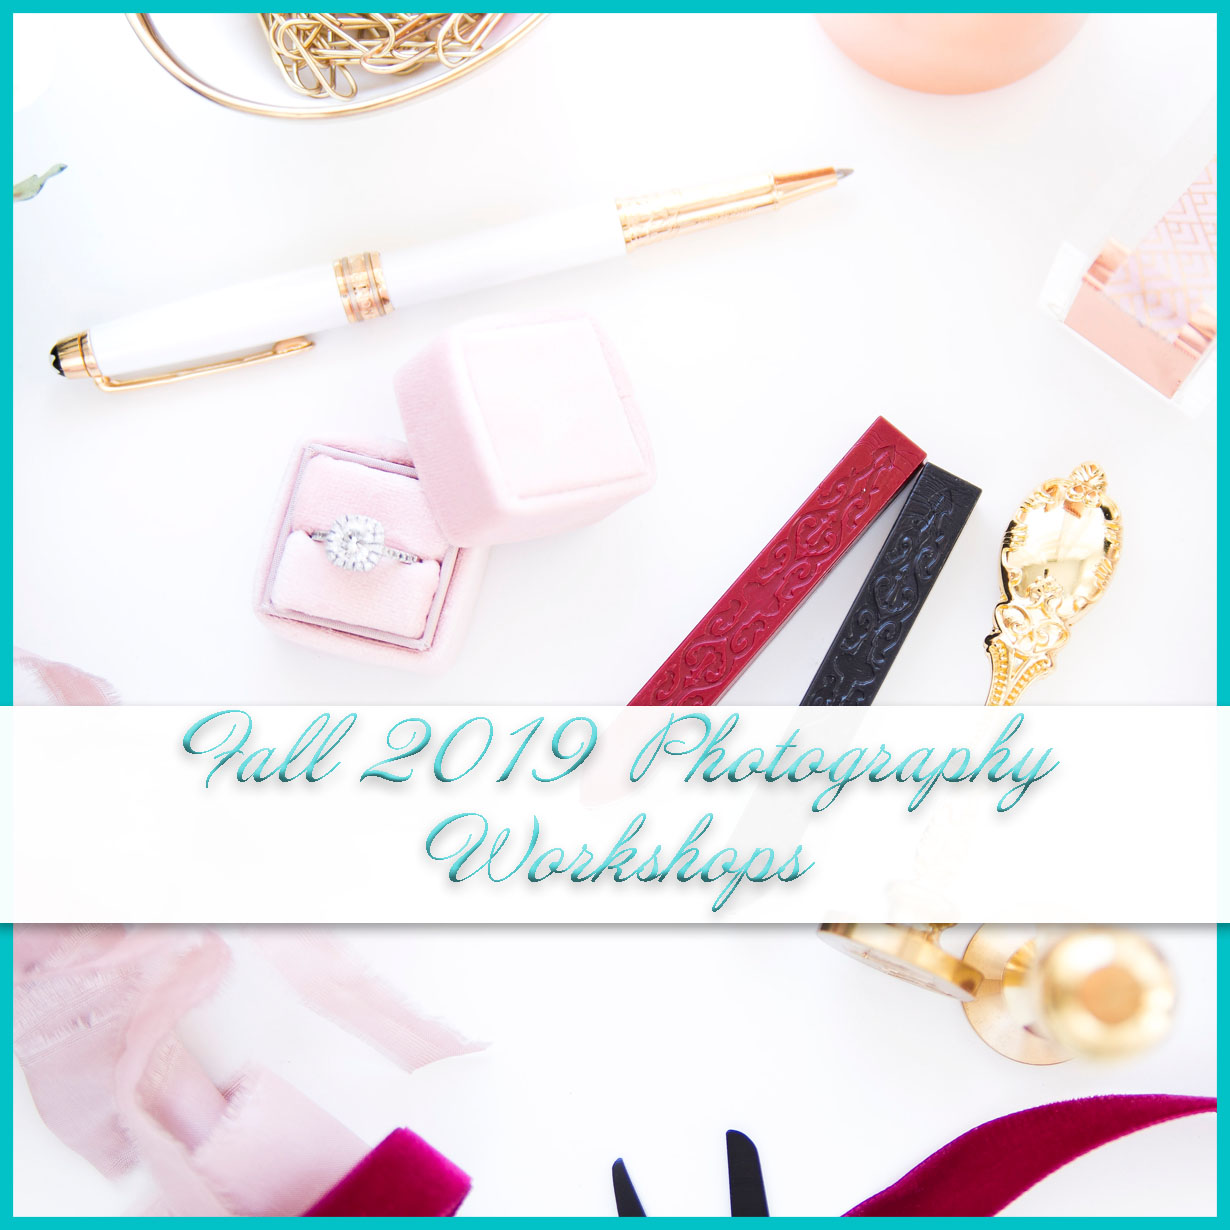 Fall 2019 Photography Workshops